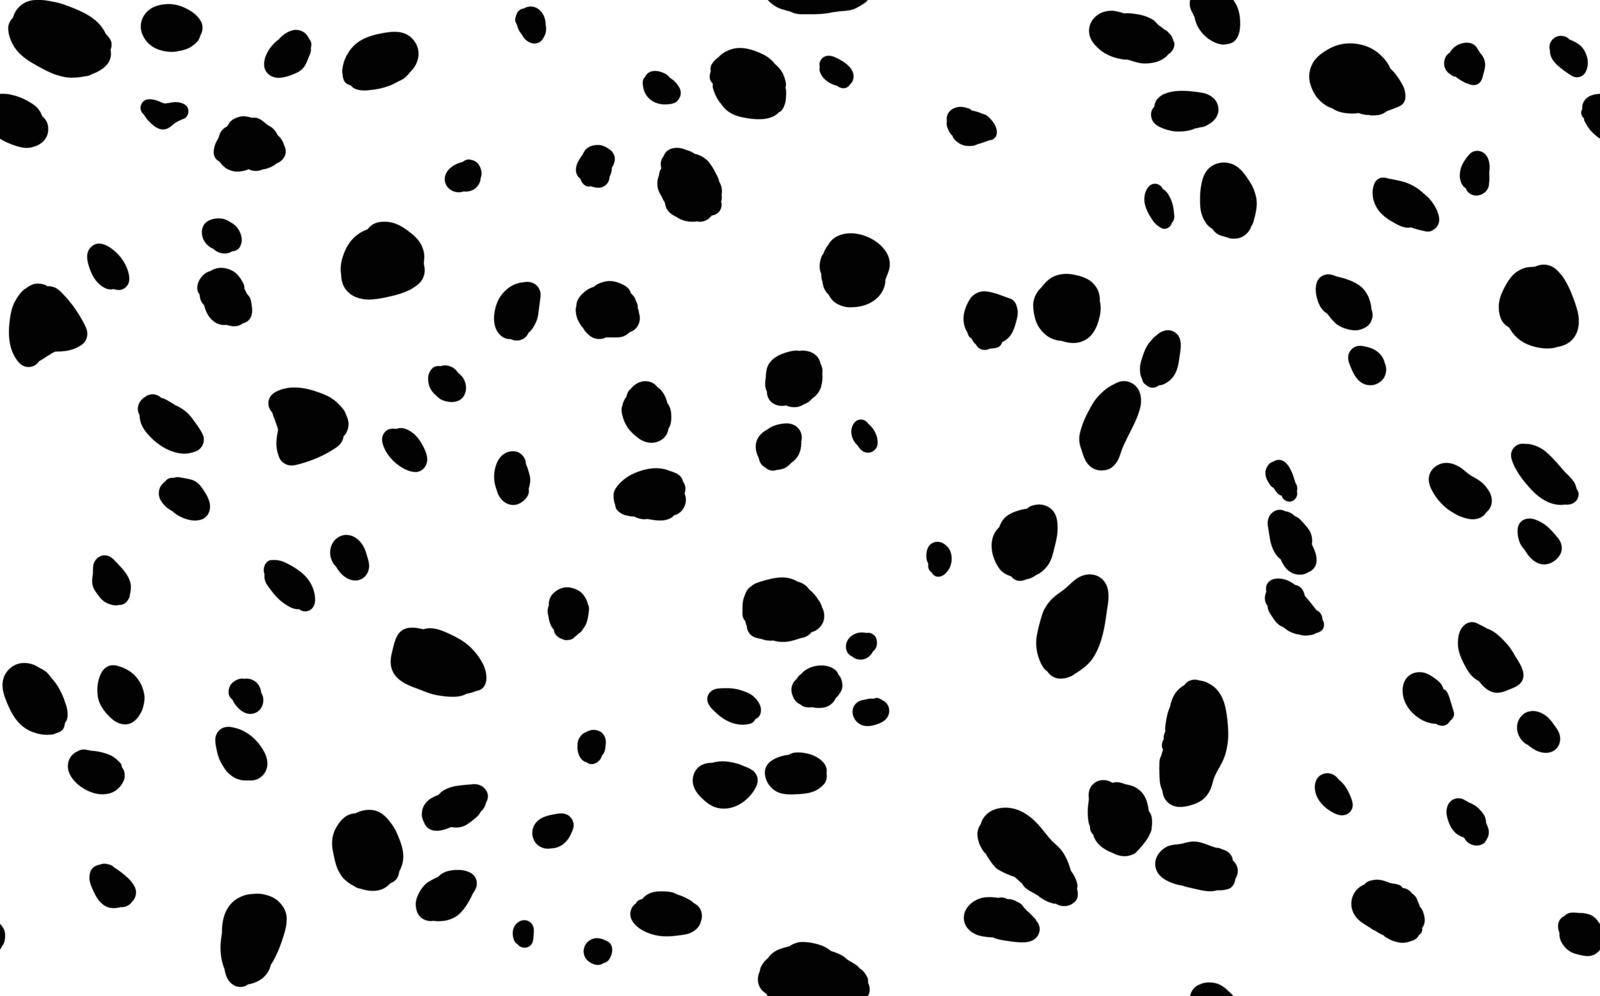 Abstract modern dalmatian fur seamless pattern. Animals trendy background. Black and white decorative vector illustration for print, card, postcard, fabric, textile. Modern ornament of stylized skin by allaku